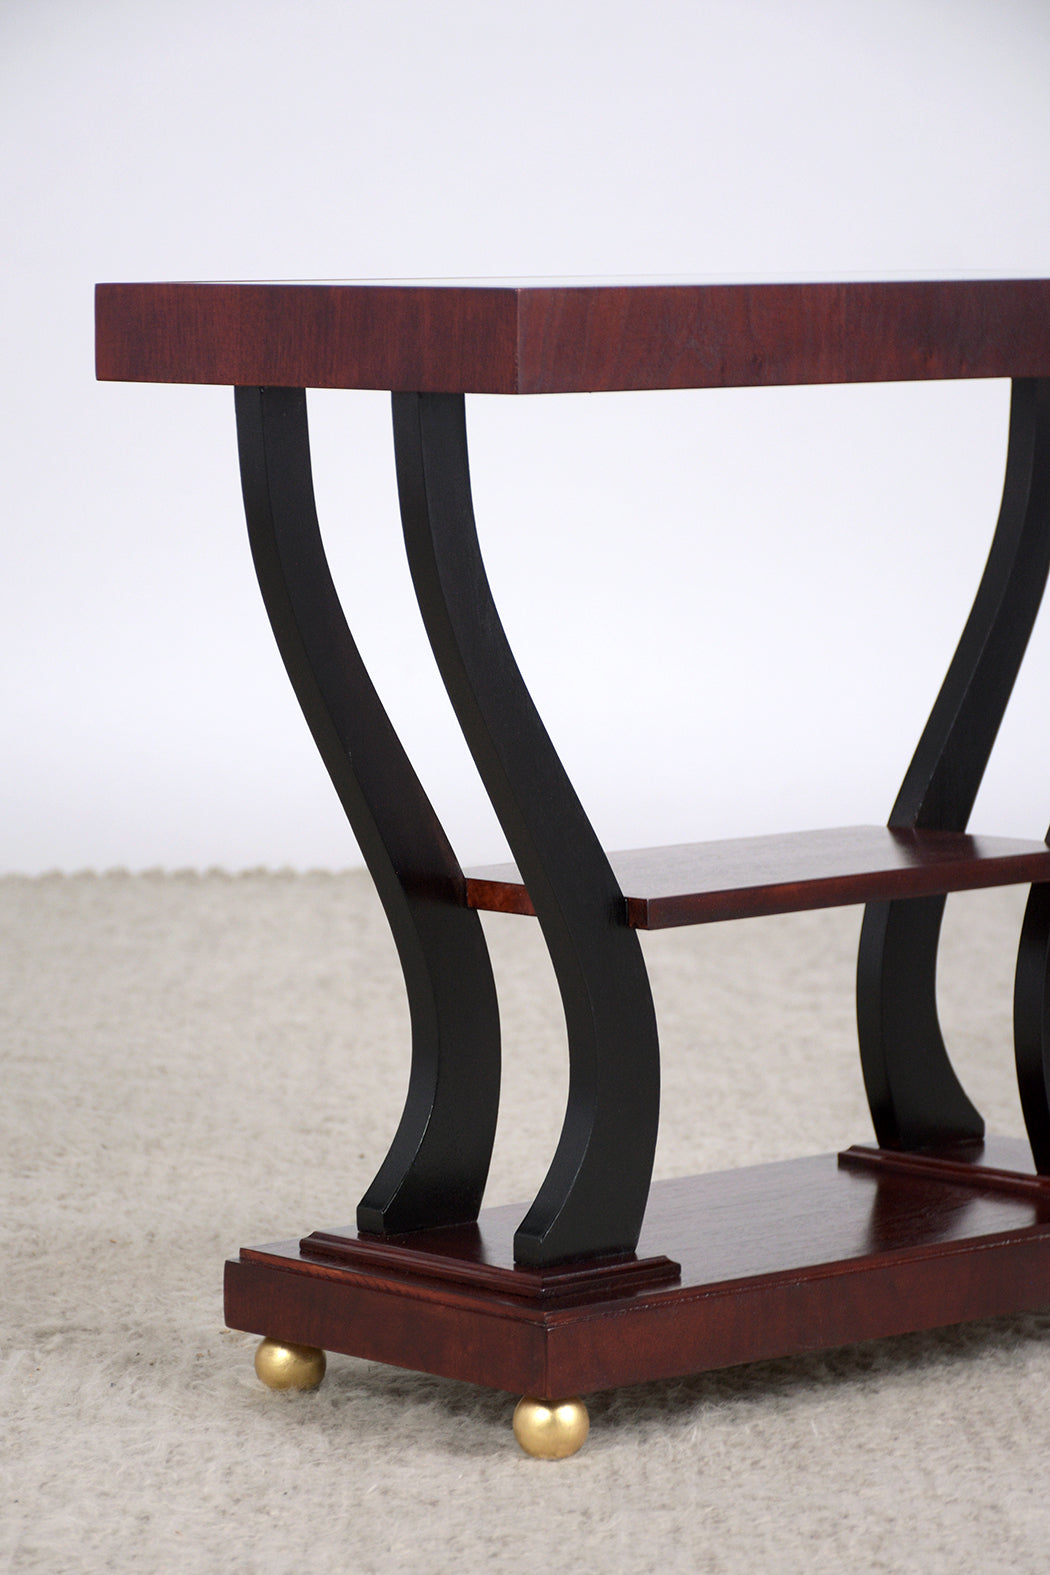 1950s Art Deco Walnut Side Tables with Ebonized Accents and Glass Tops